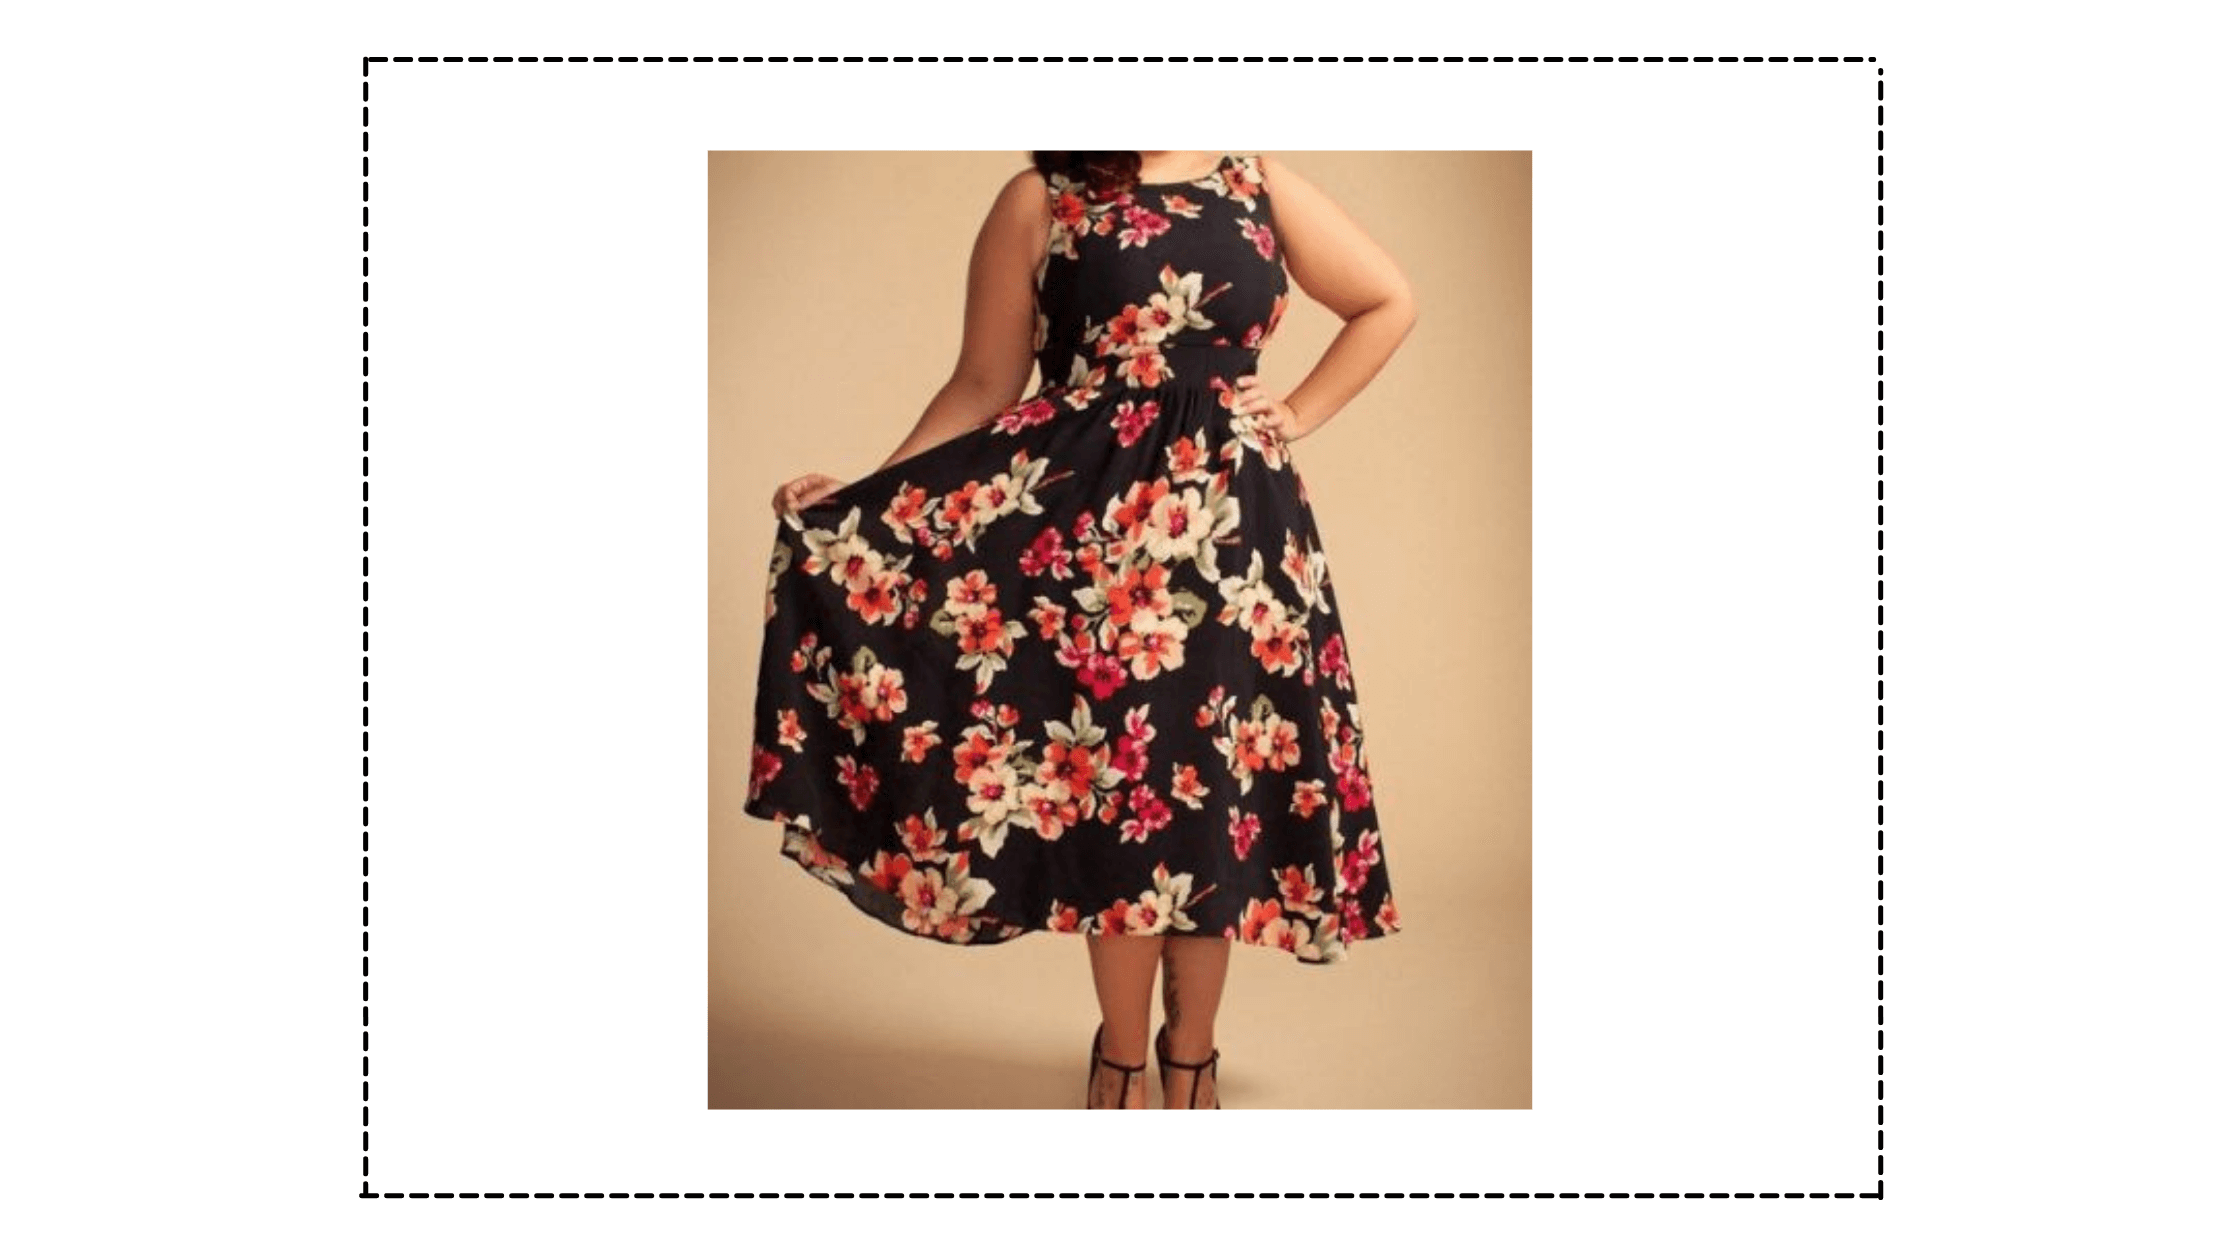 Dresses Look Best On Obese Women